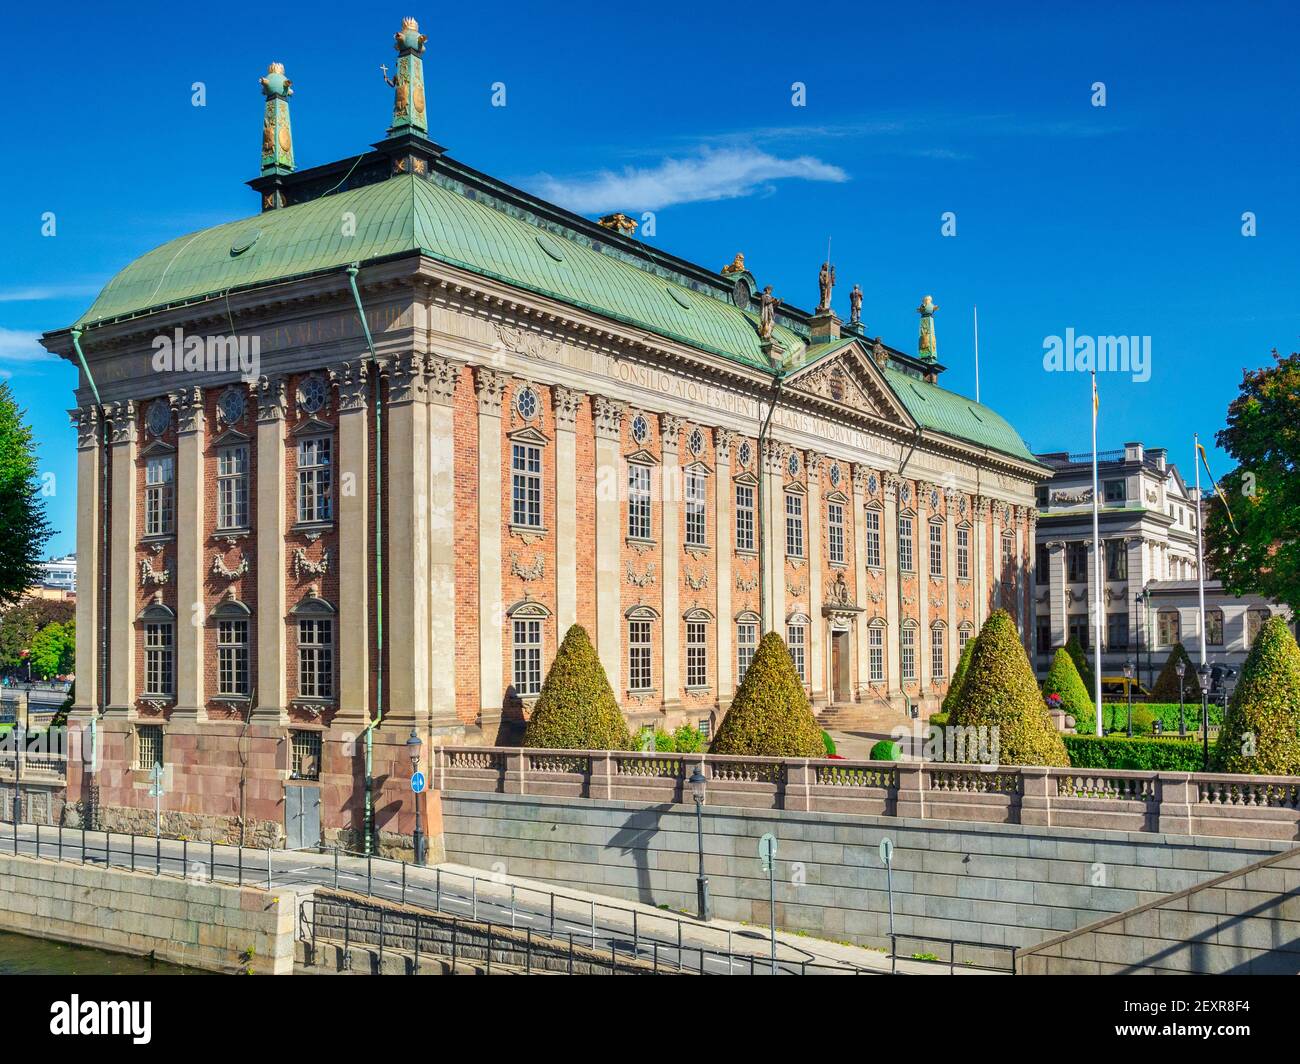 The Riddarhuset, or Palace of the Nobility, in Stockholm, Sweden, on a sunny autumn day with deep blue sky. Stock Photo